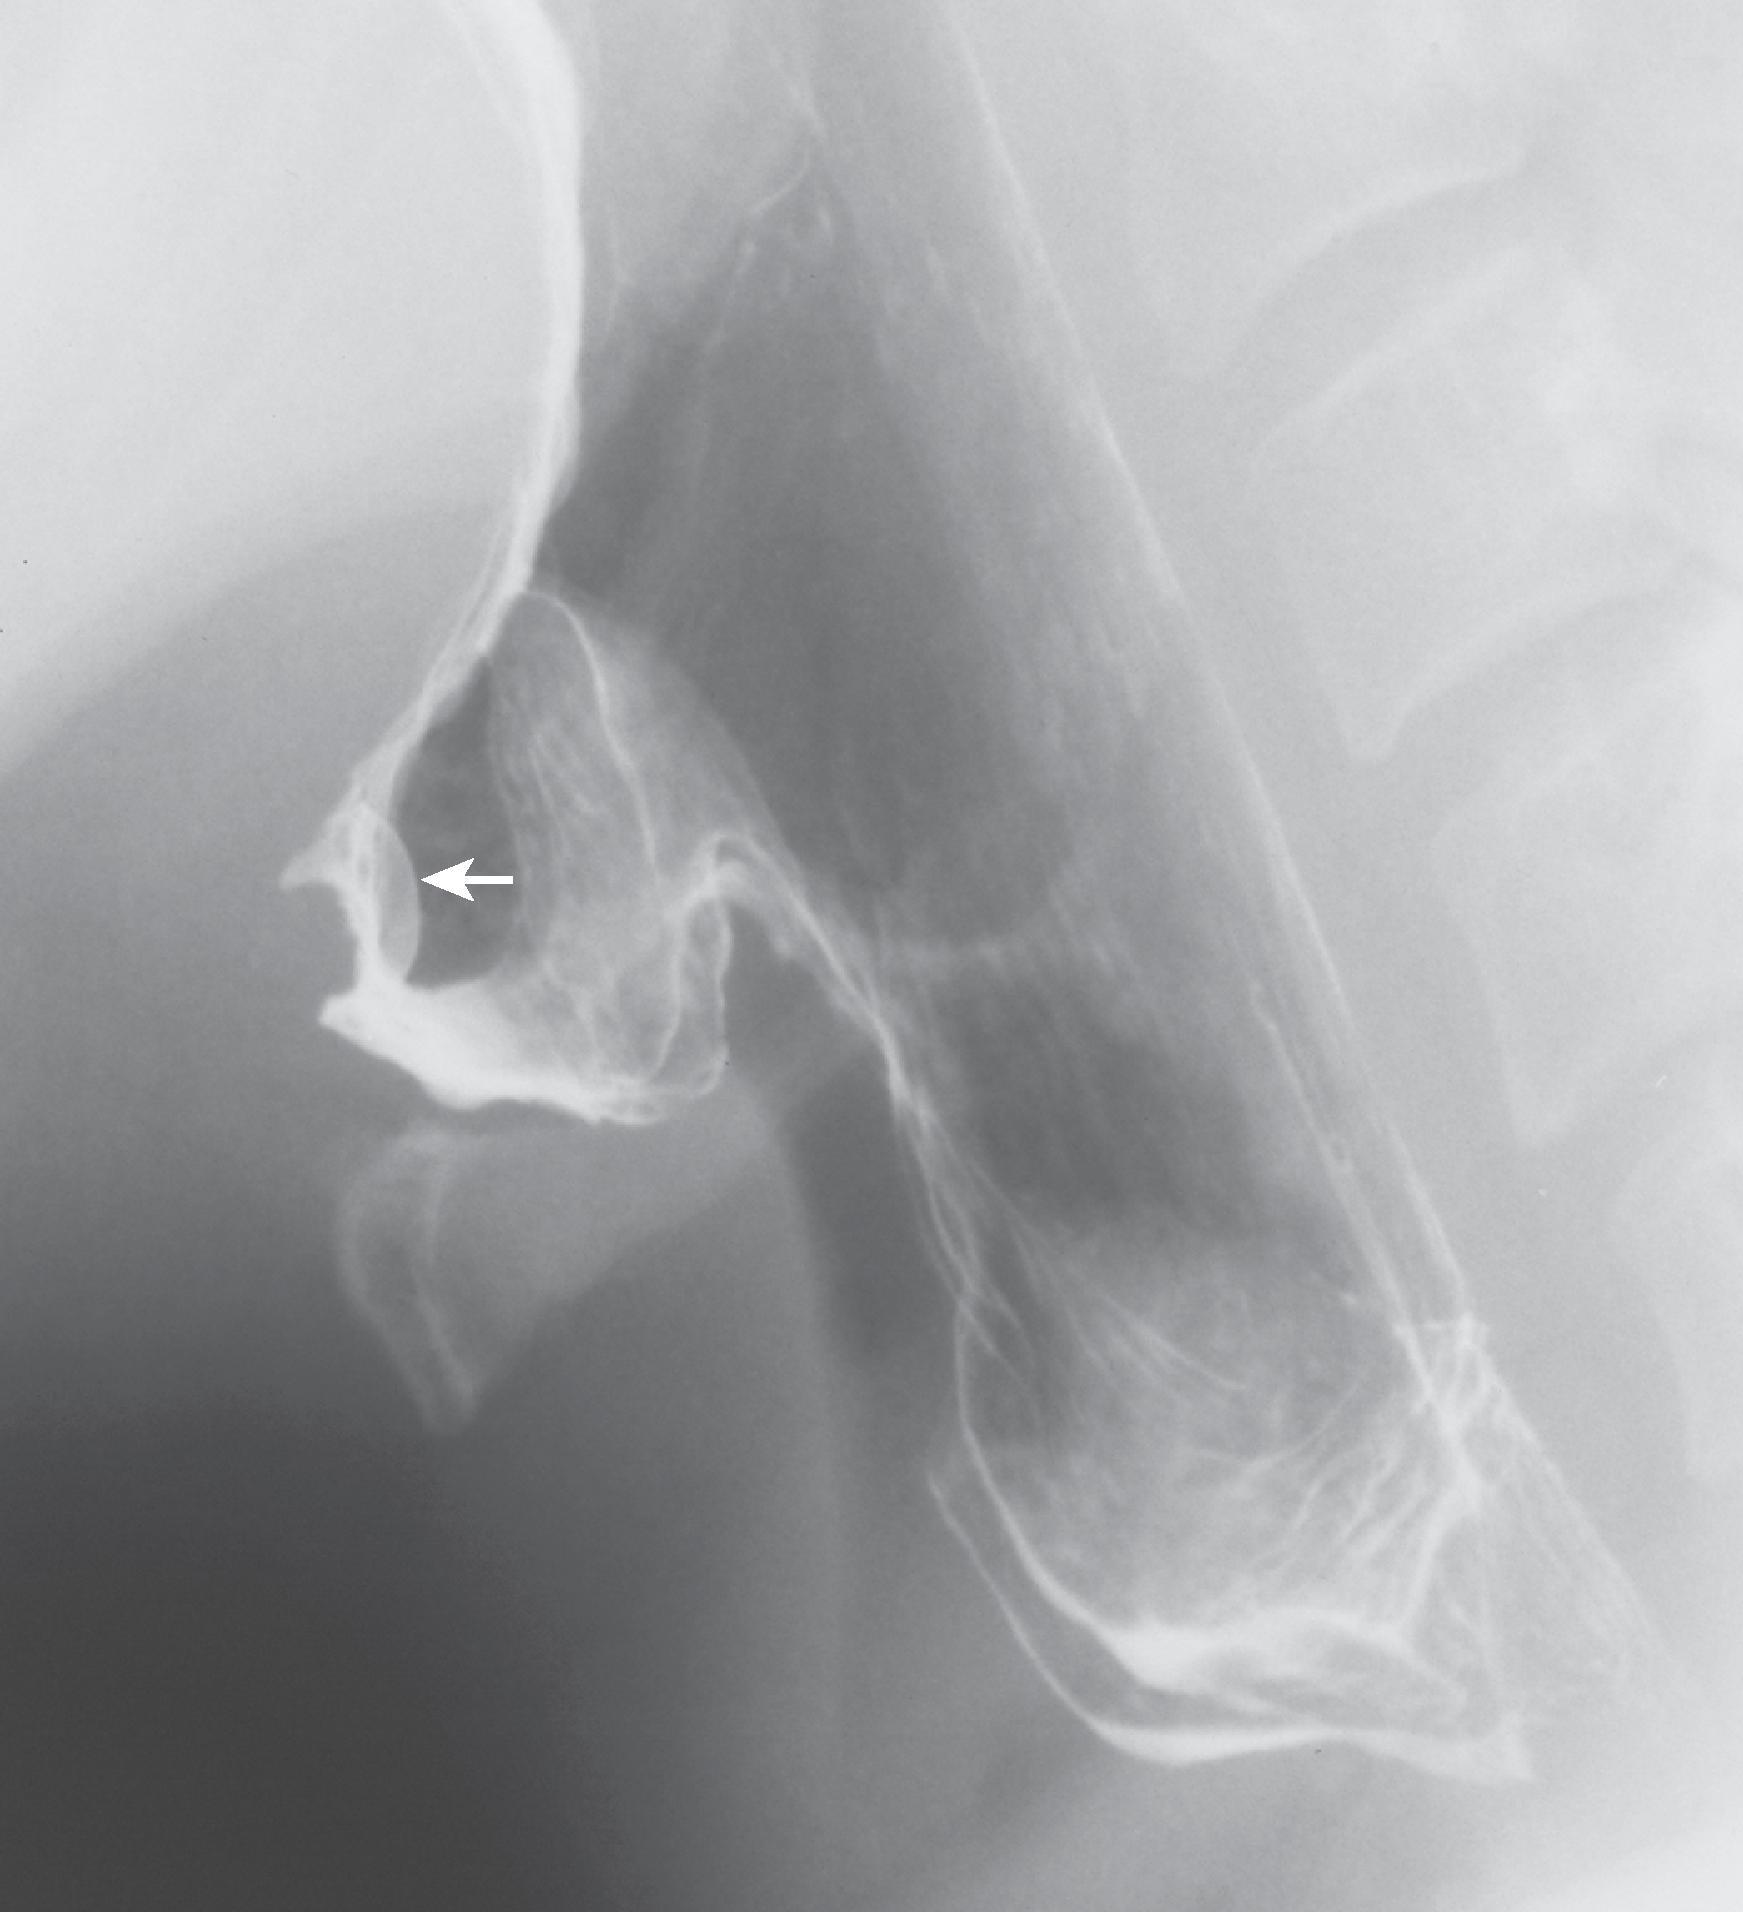 Fig. 5.13, Retention cyst at the base of the tongue. Lateral view of the pharynx shows a smooth-surfaced hemispheric mass ( arrow ) protruding from the posteroinferior tongue base.